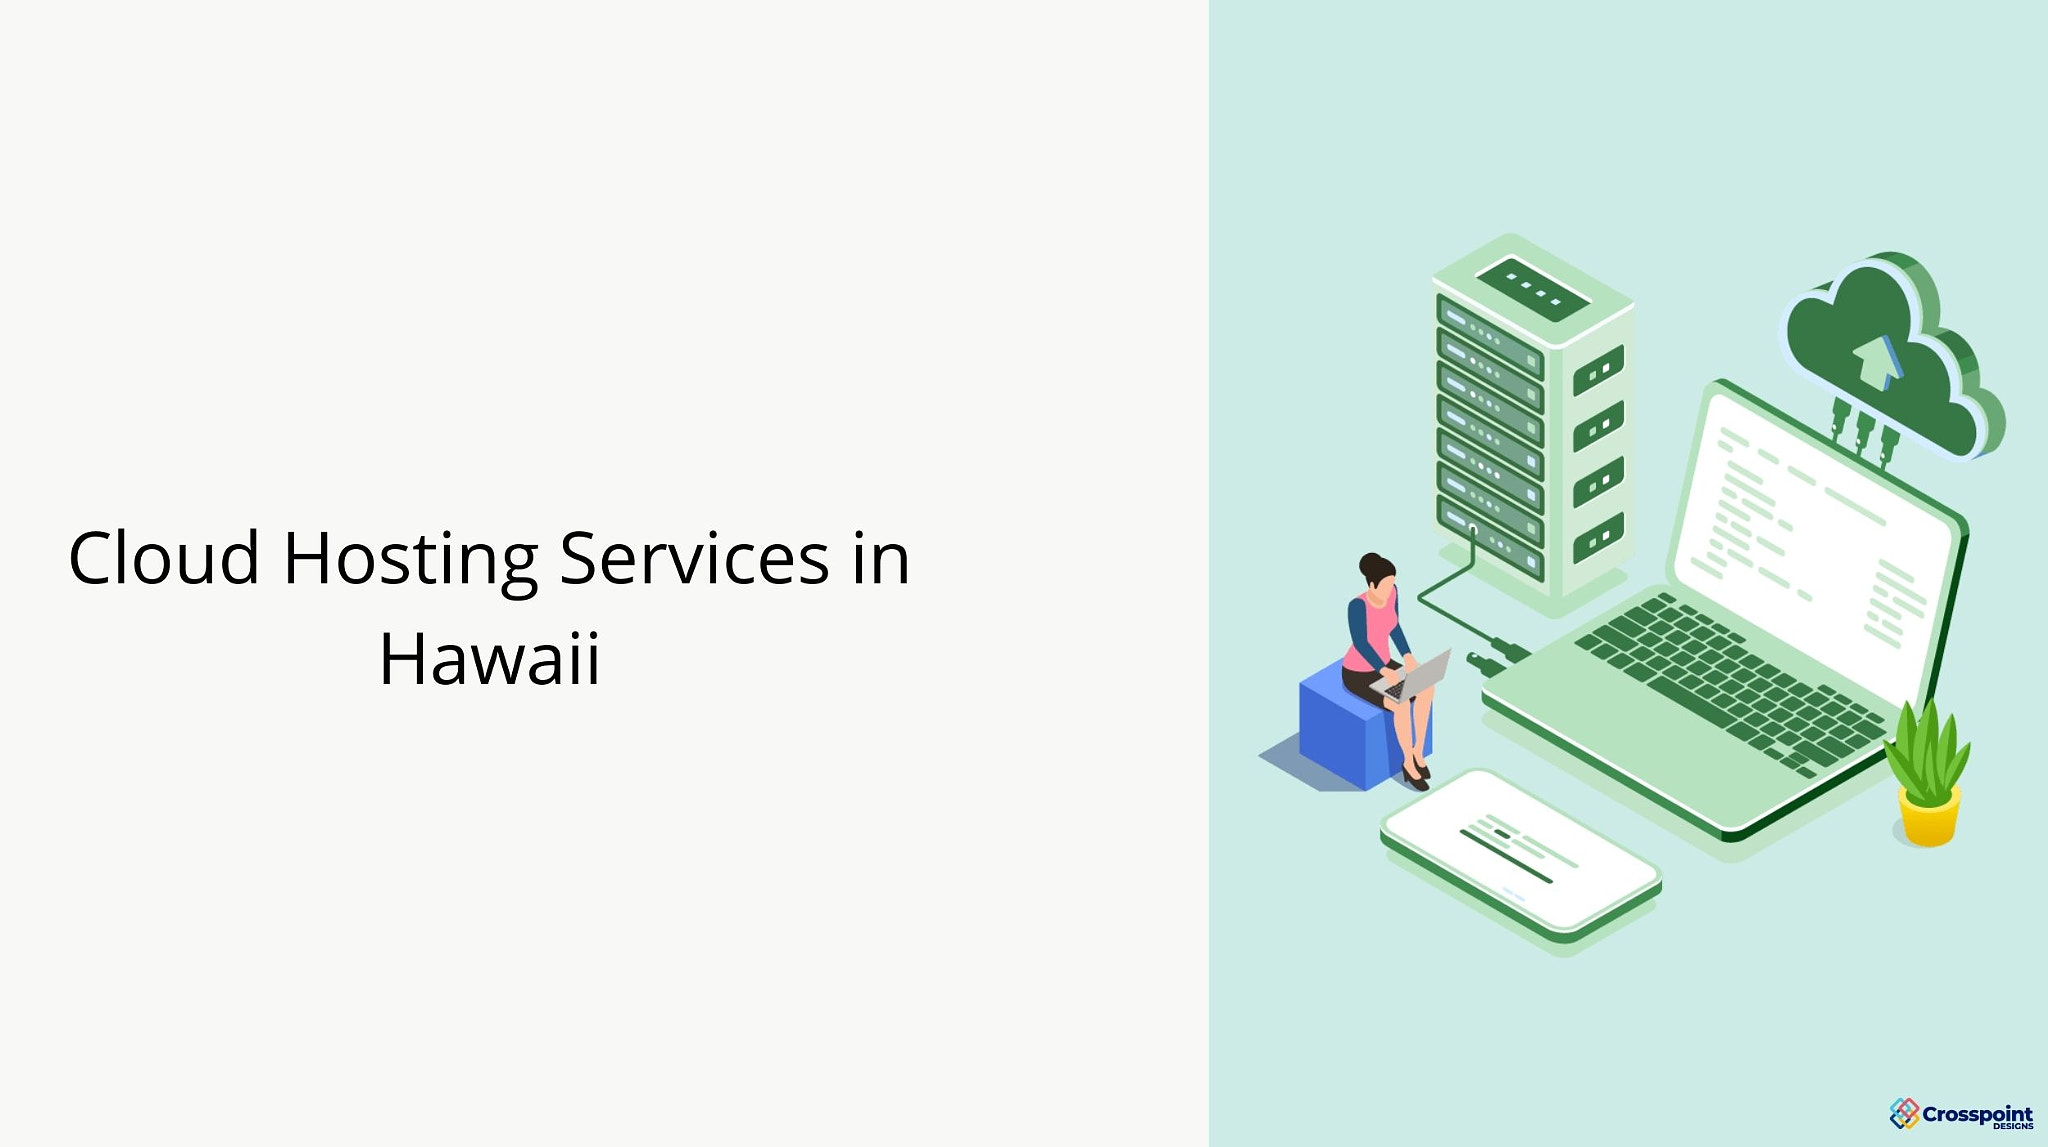 Cloud Hosting Services in Hawaii